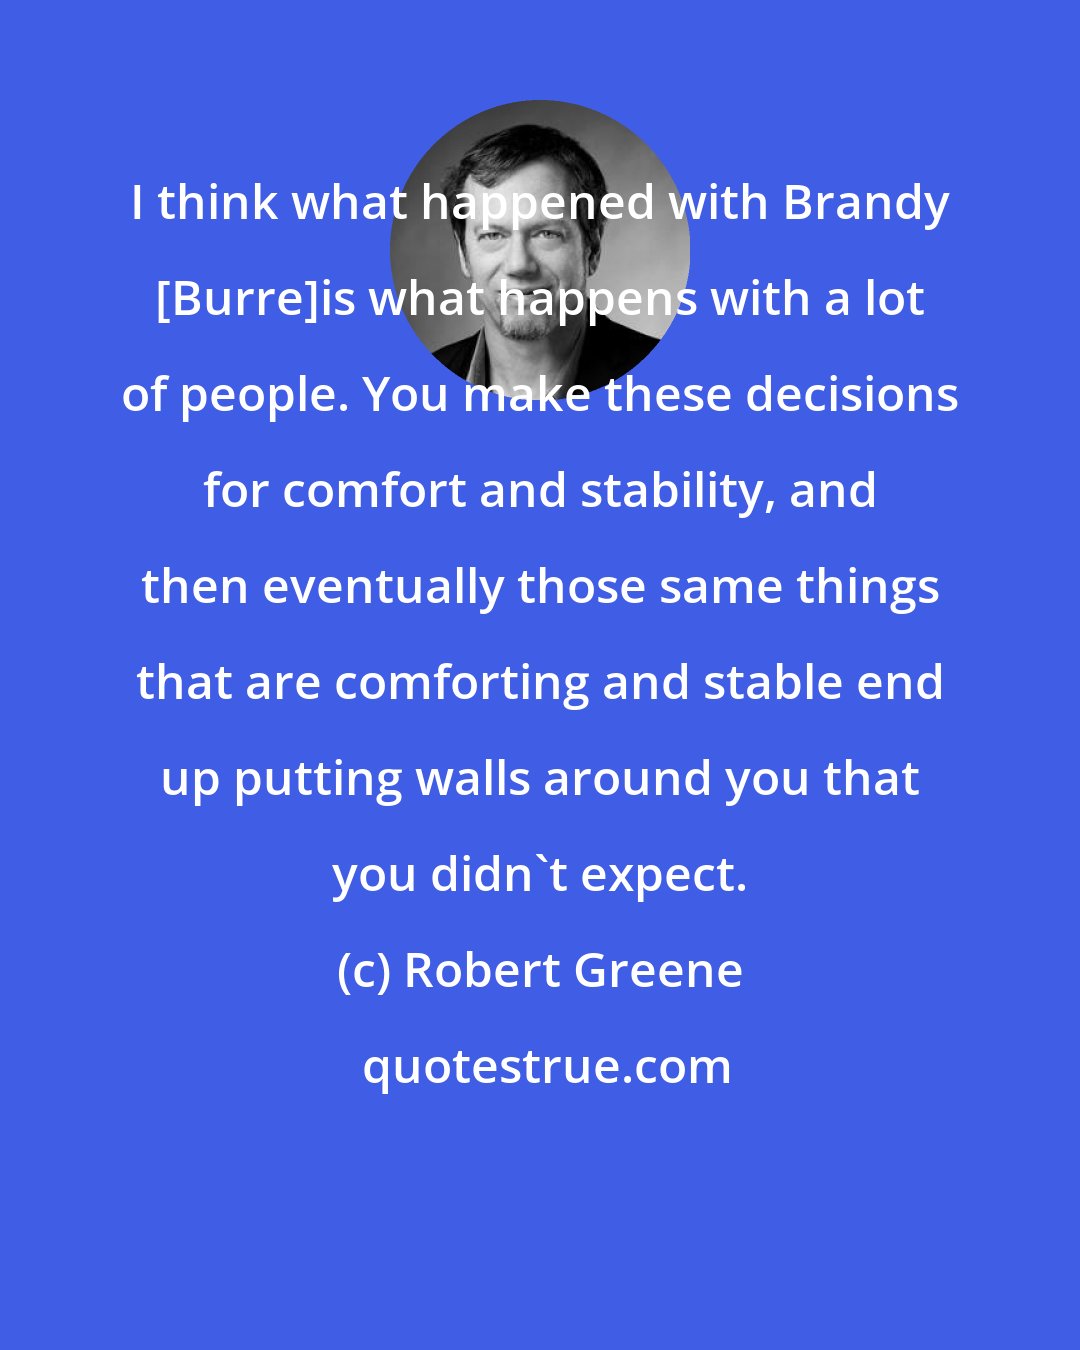 Robert Greene: I think what happened with Brandy [Burre]is what happens with a lot of people. You make these decisions for comfort and stability, and then eventually those same things that are comforting and stable end up putting walls around you that you didn't expect.